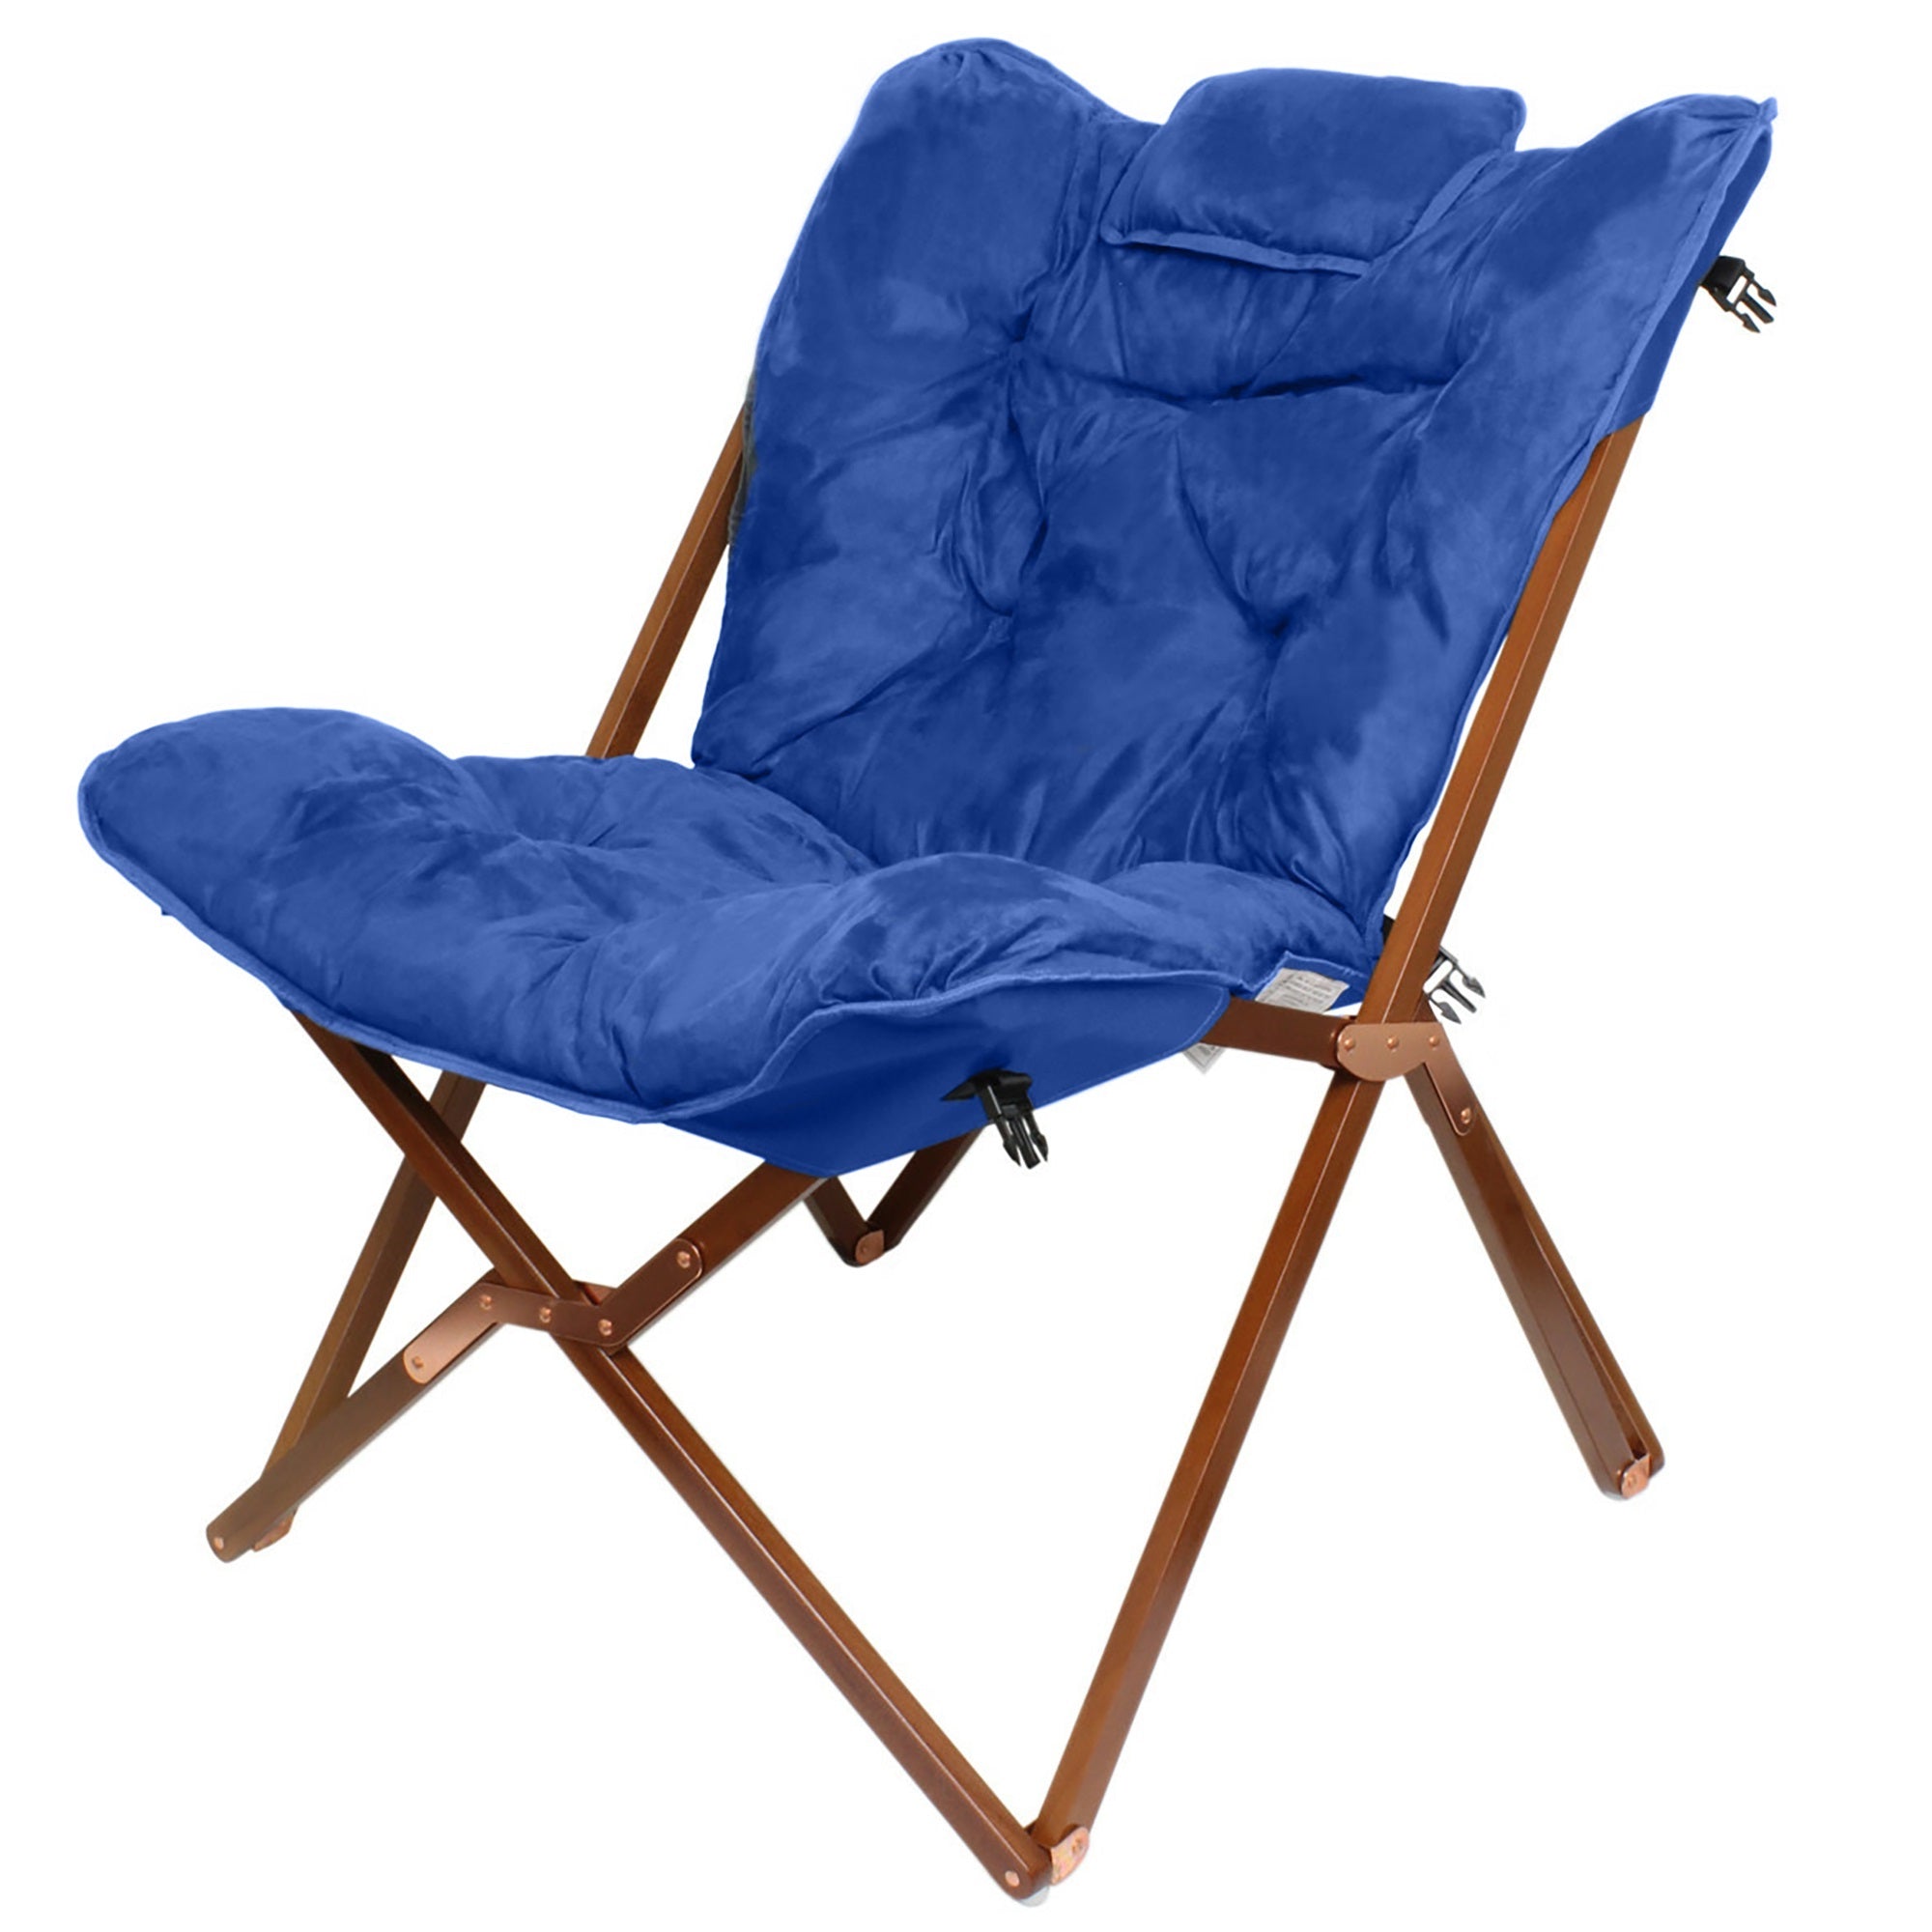 Zenithen Indoor Wood Butterfly Folding Accent Chair For Dorms, Bedrooms, and Living Rooms